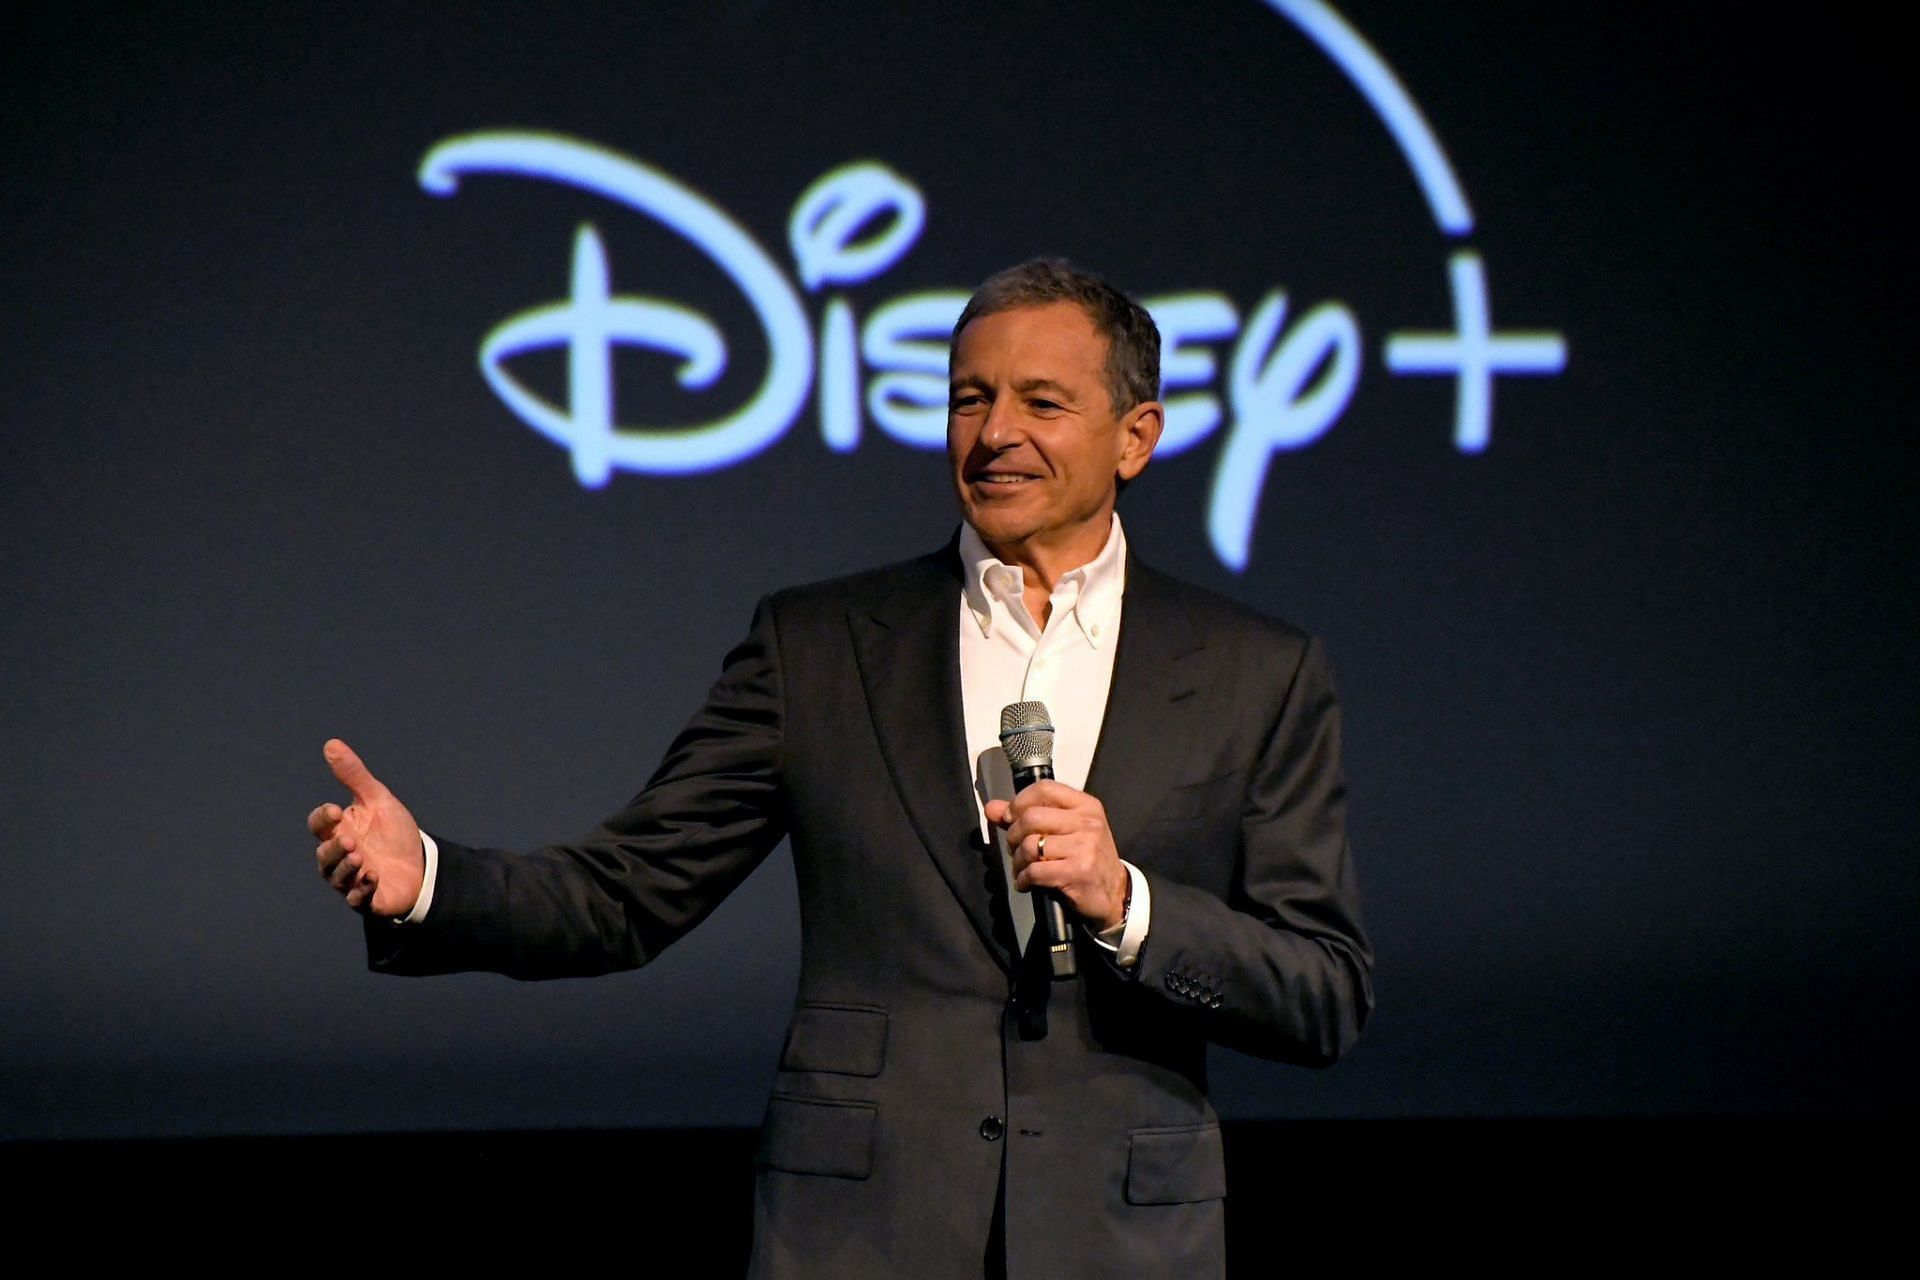 Bob Iger is the current CEO of Disney (Image via. Twitter/@CryptoJustin)